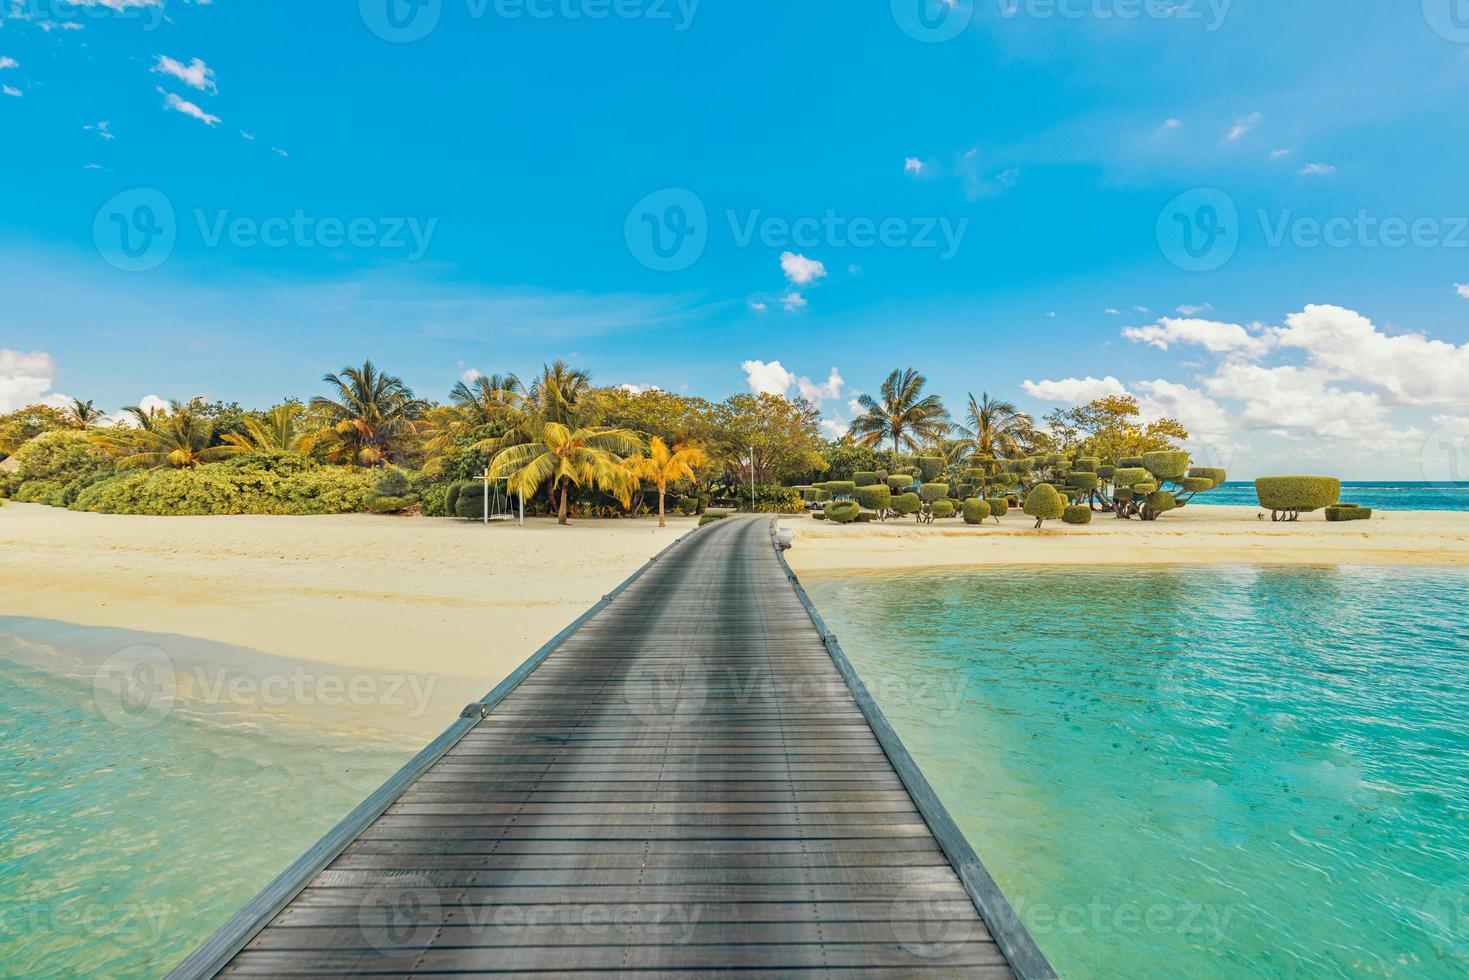 Amazing panorama at Maldives. Luxury resort villas pier seascape with palm trees, white sand and blue sky. Beautiful summer landscape. Tropical beach background for vacation holiday. Paradise island photo